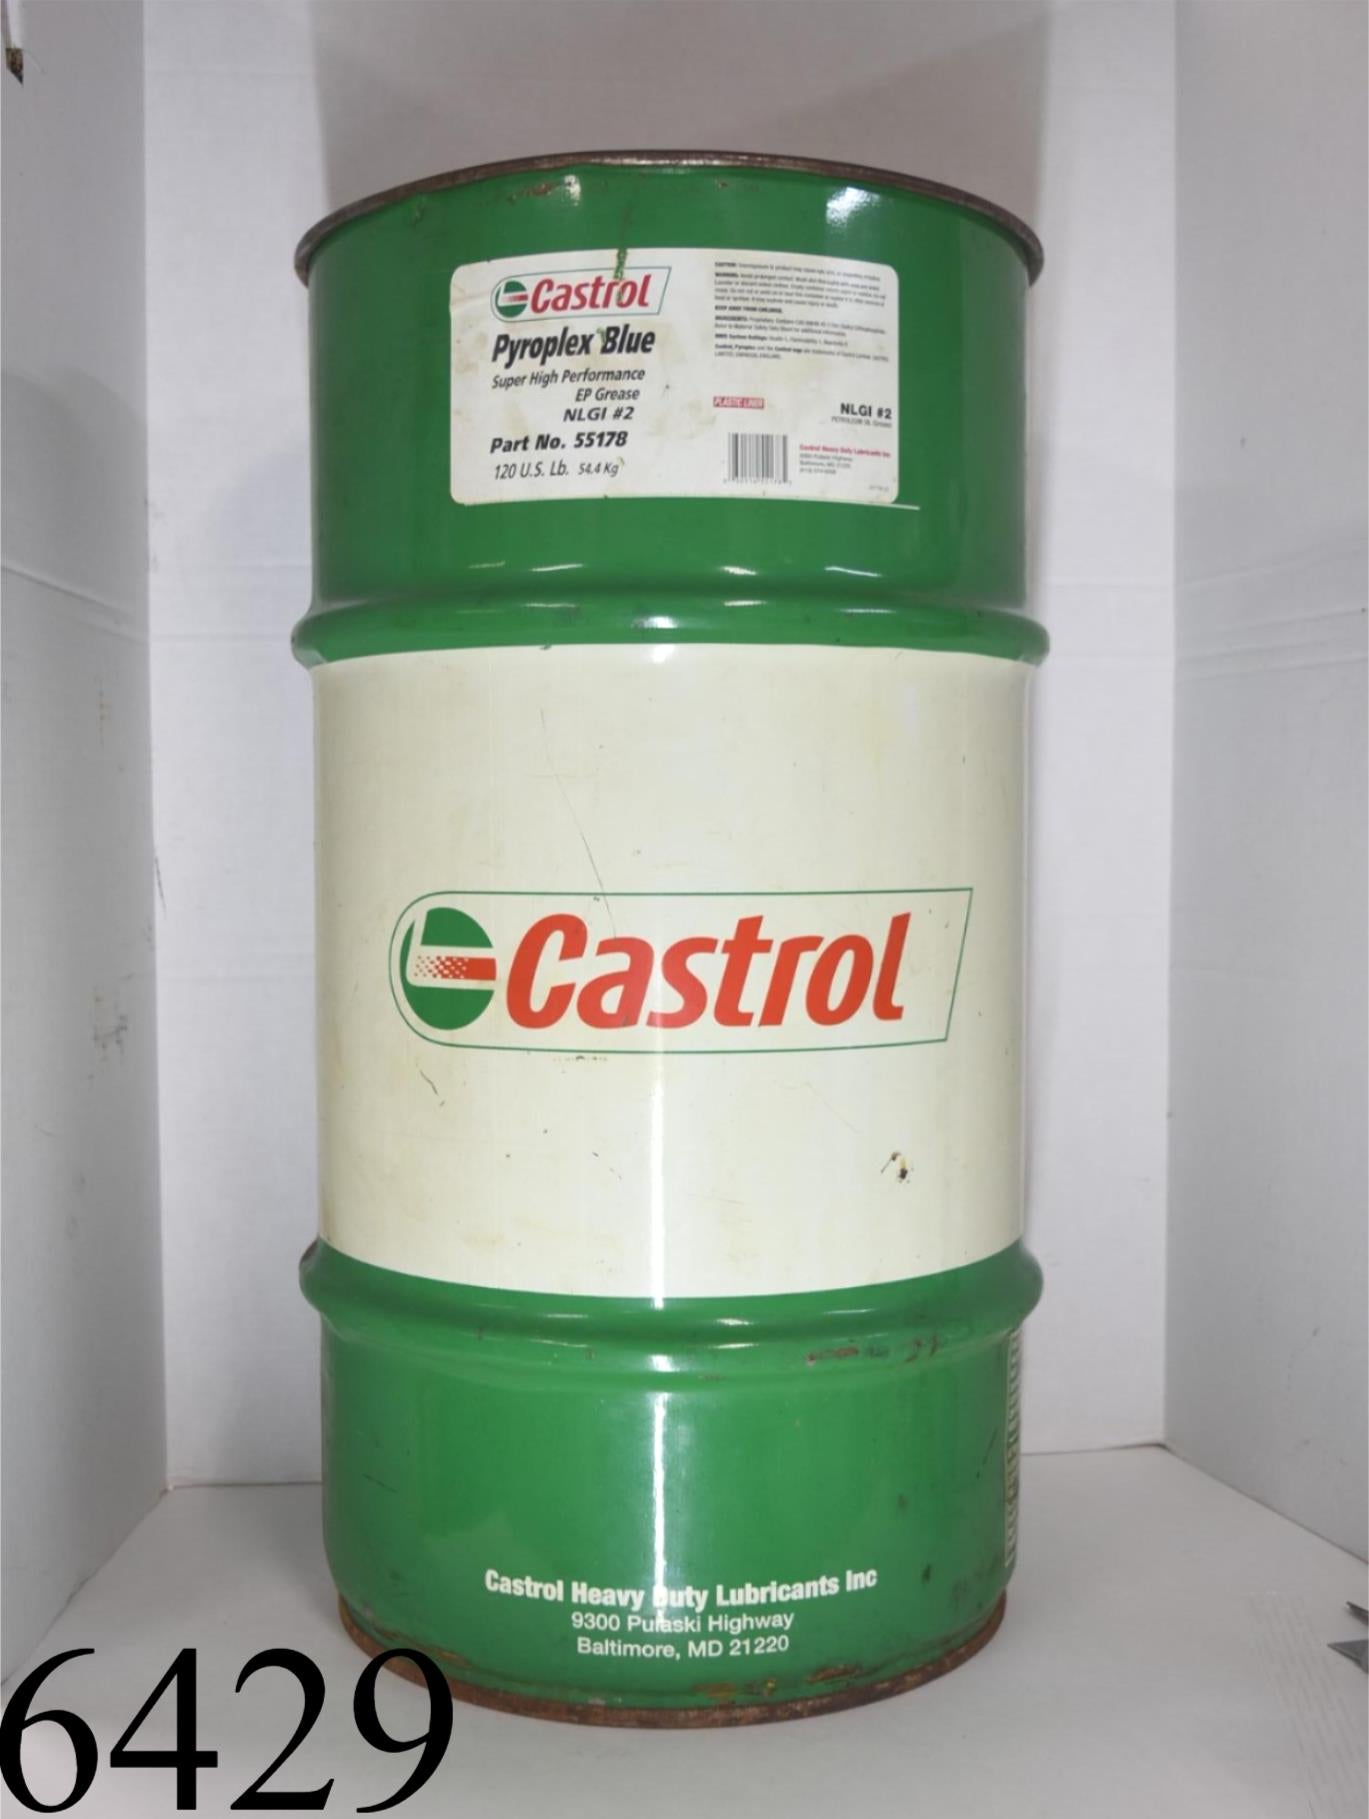 Best Castrol Metal Cans. Great For Garage Or Man Cave. Use As